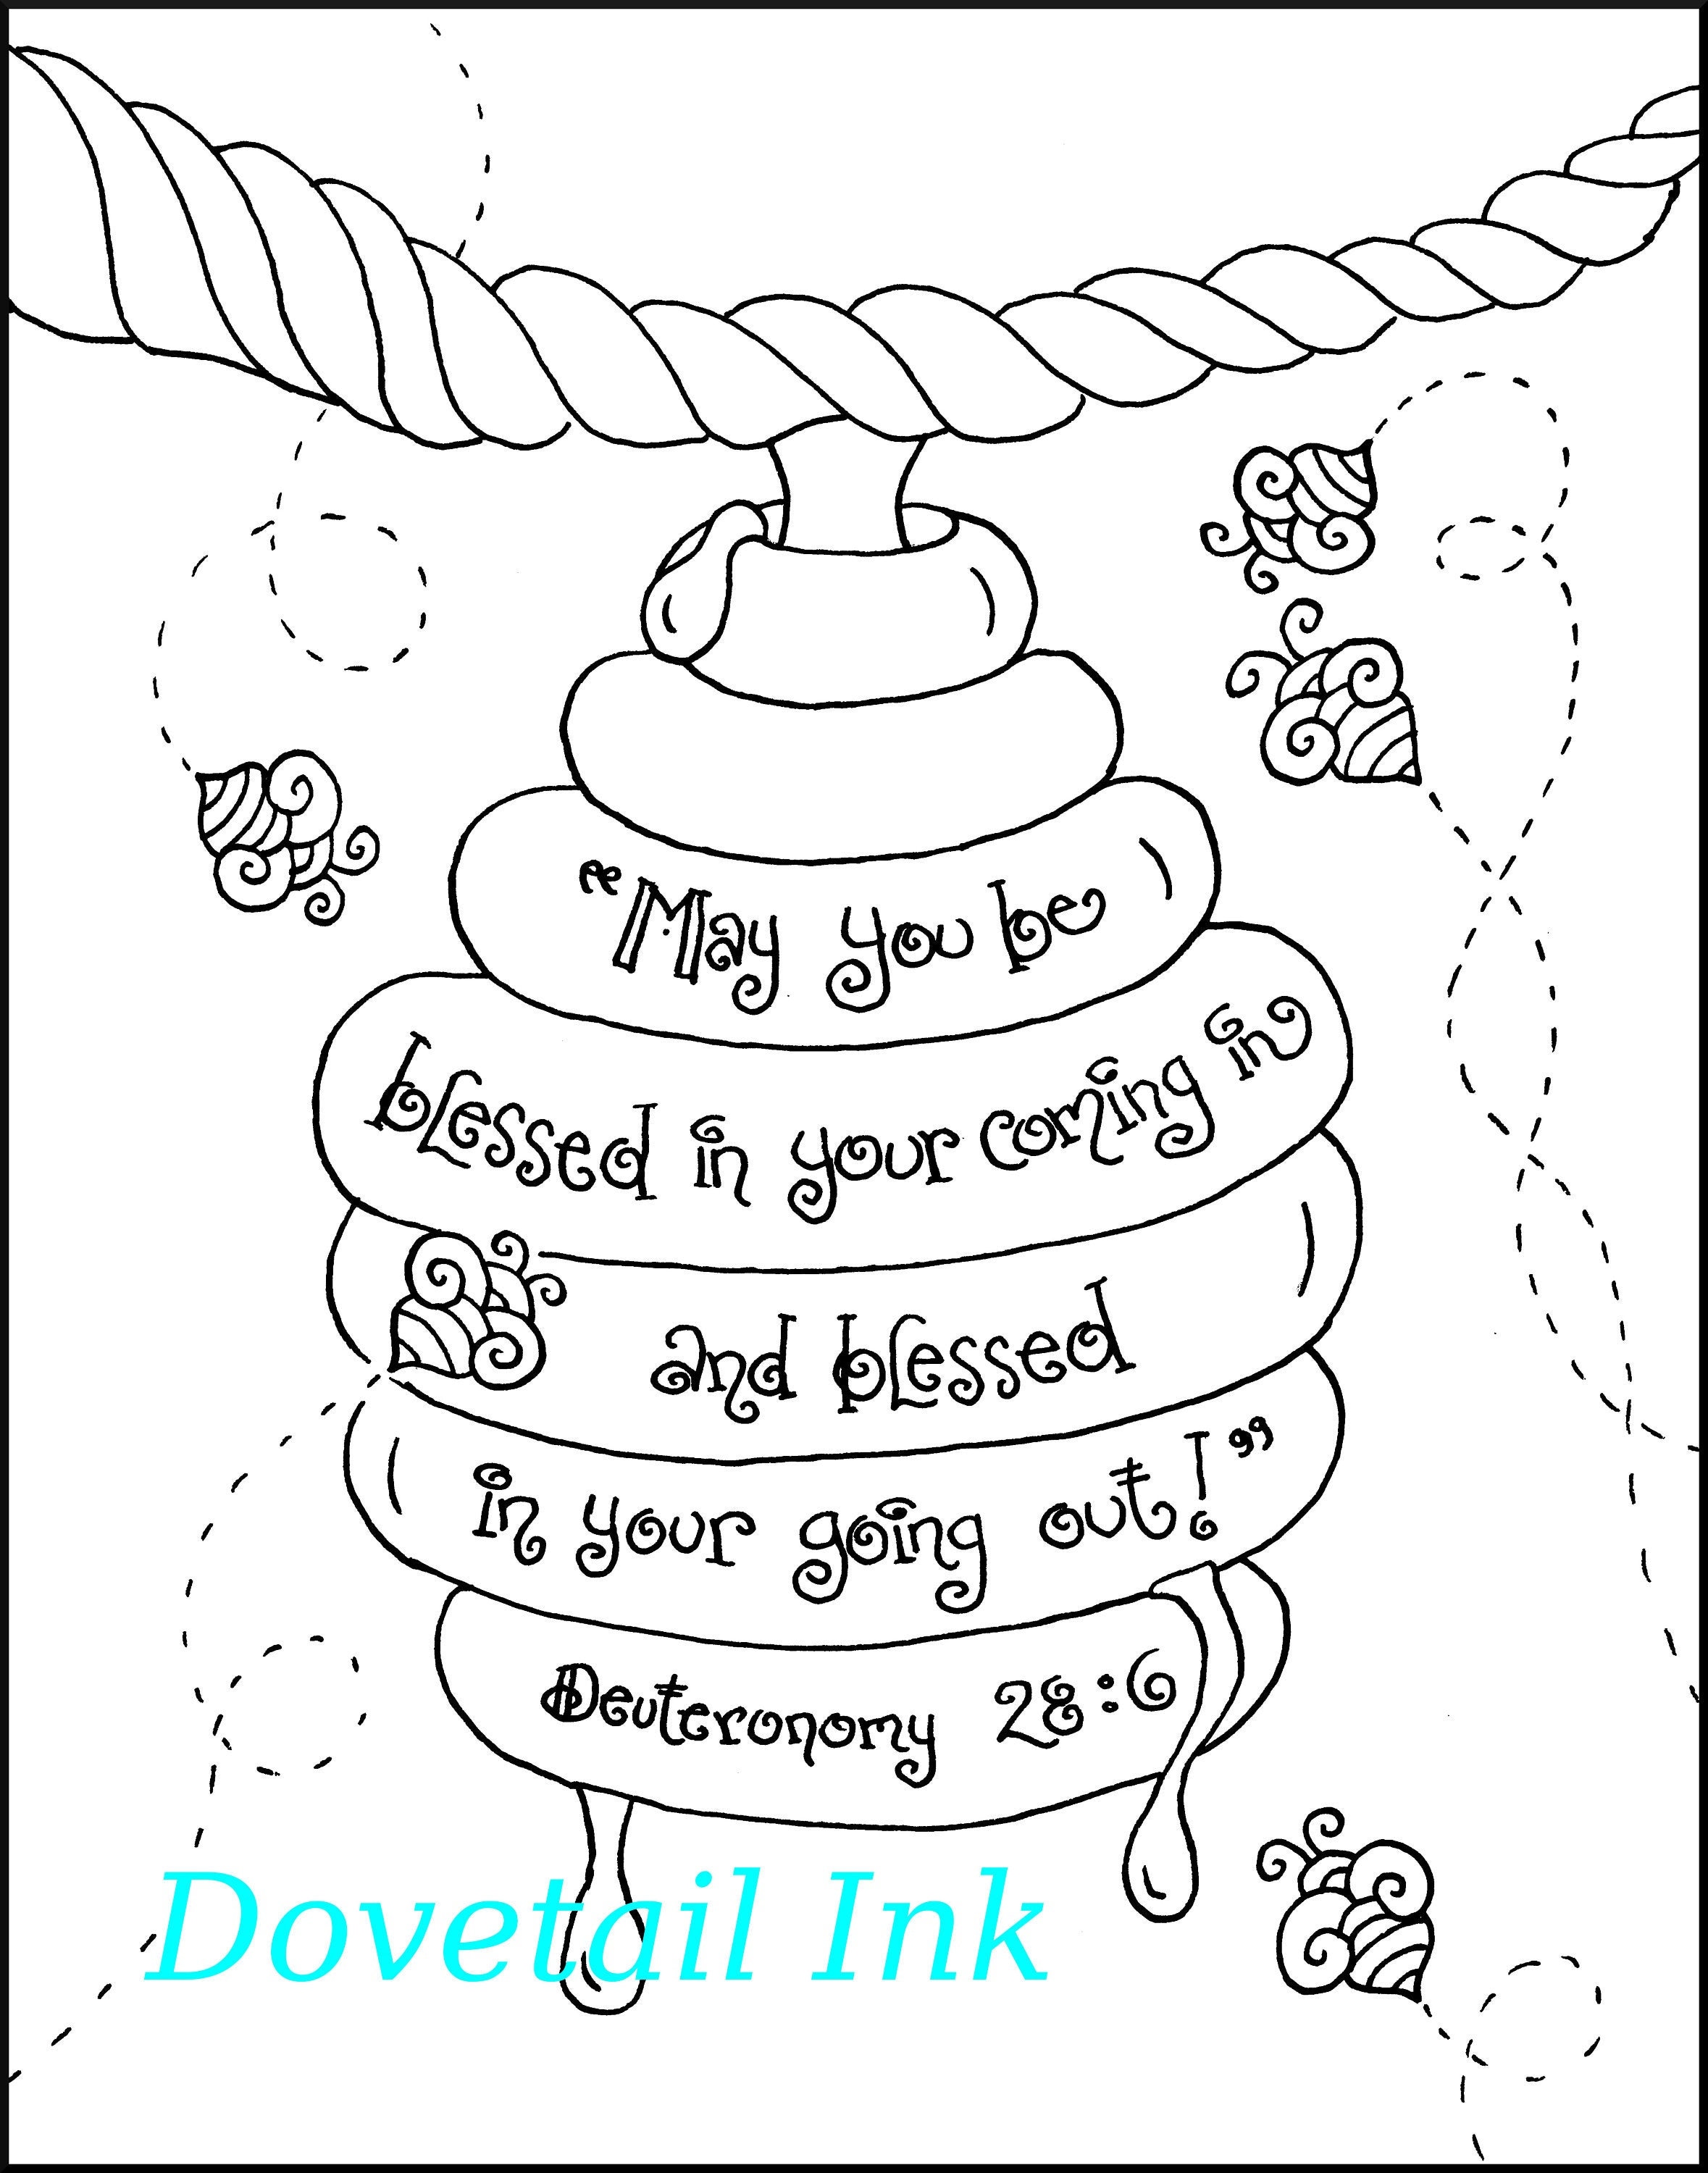 Printable christian coloring page for sunday school homeschool re rcia be blessed deuteronomy housewarming or moving